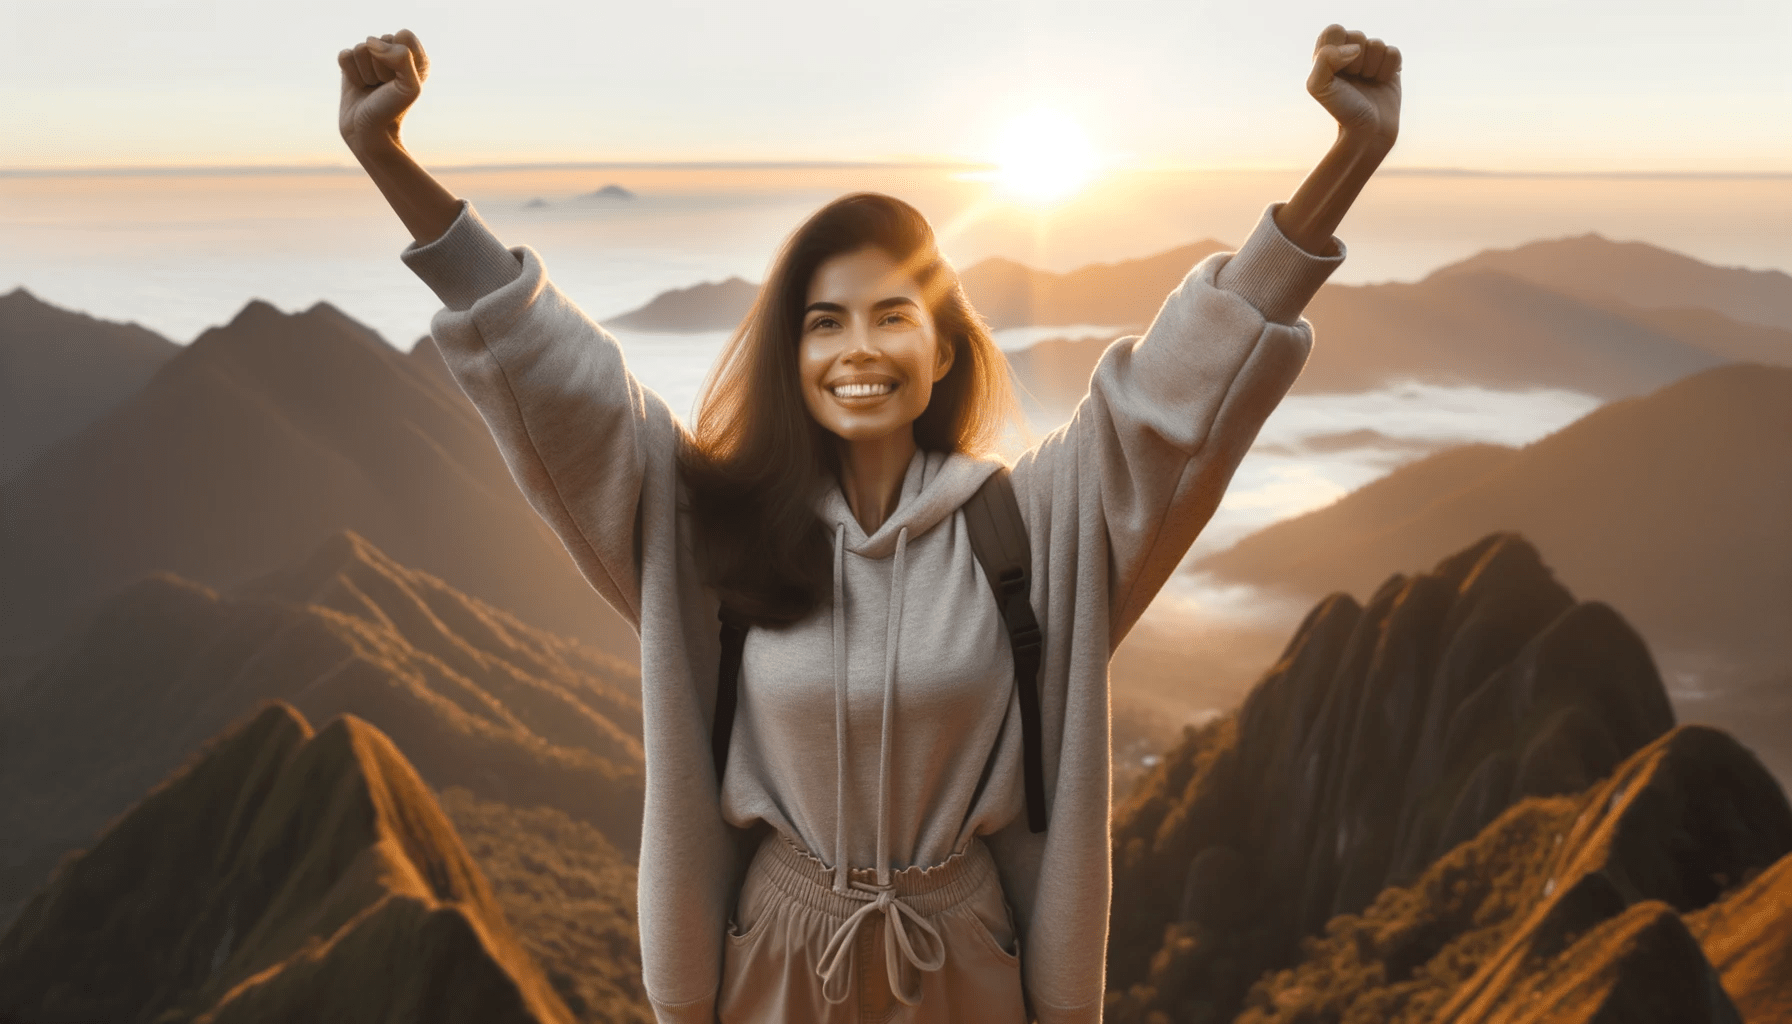 a young woman with Hispanic descent standing on a mountain peak her arms raised triumphantly with the sunrise illuminating her face symbol